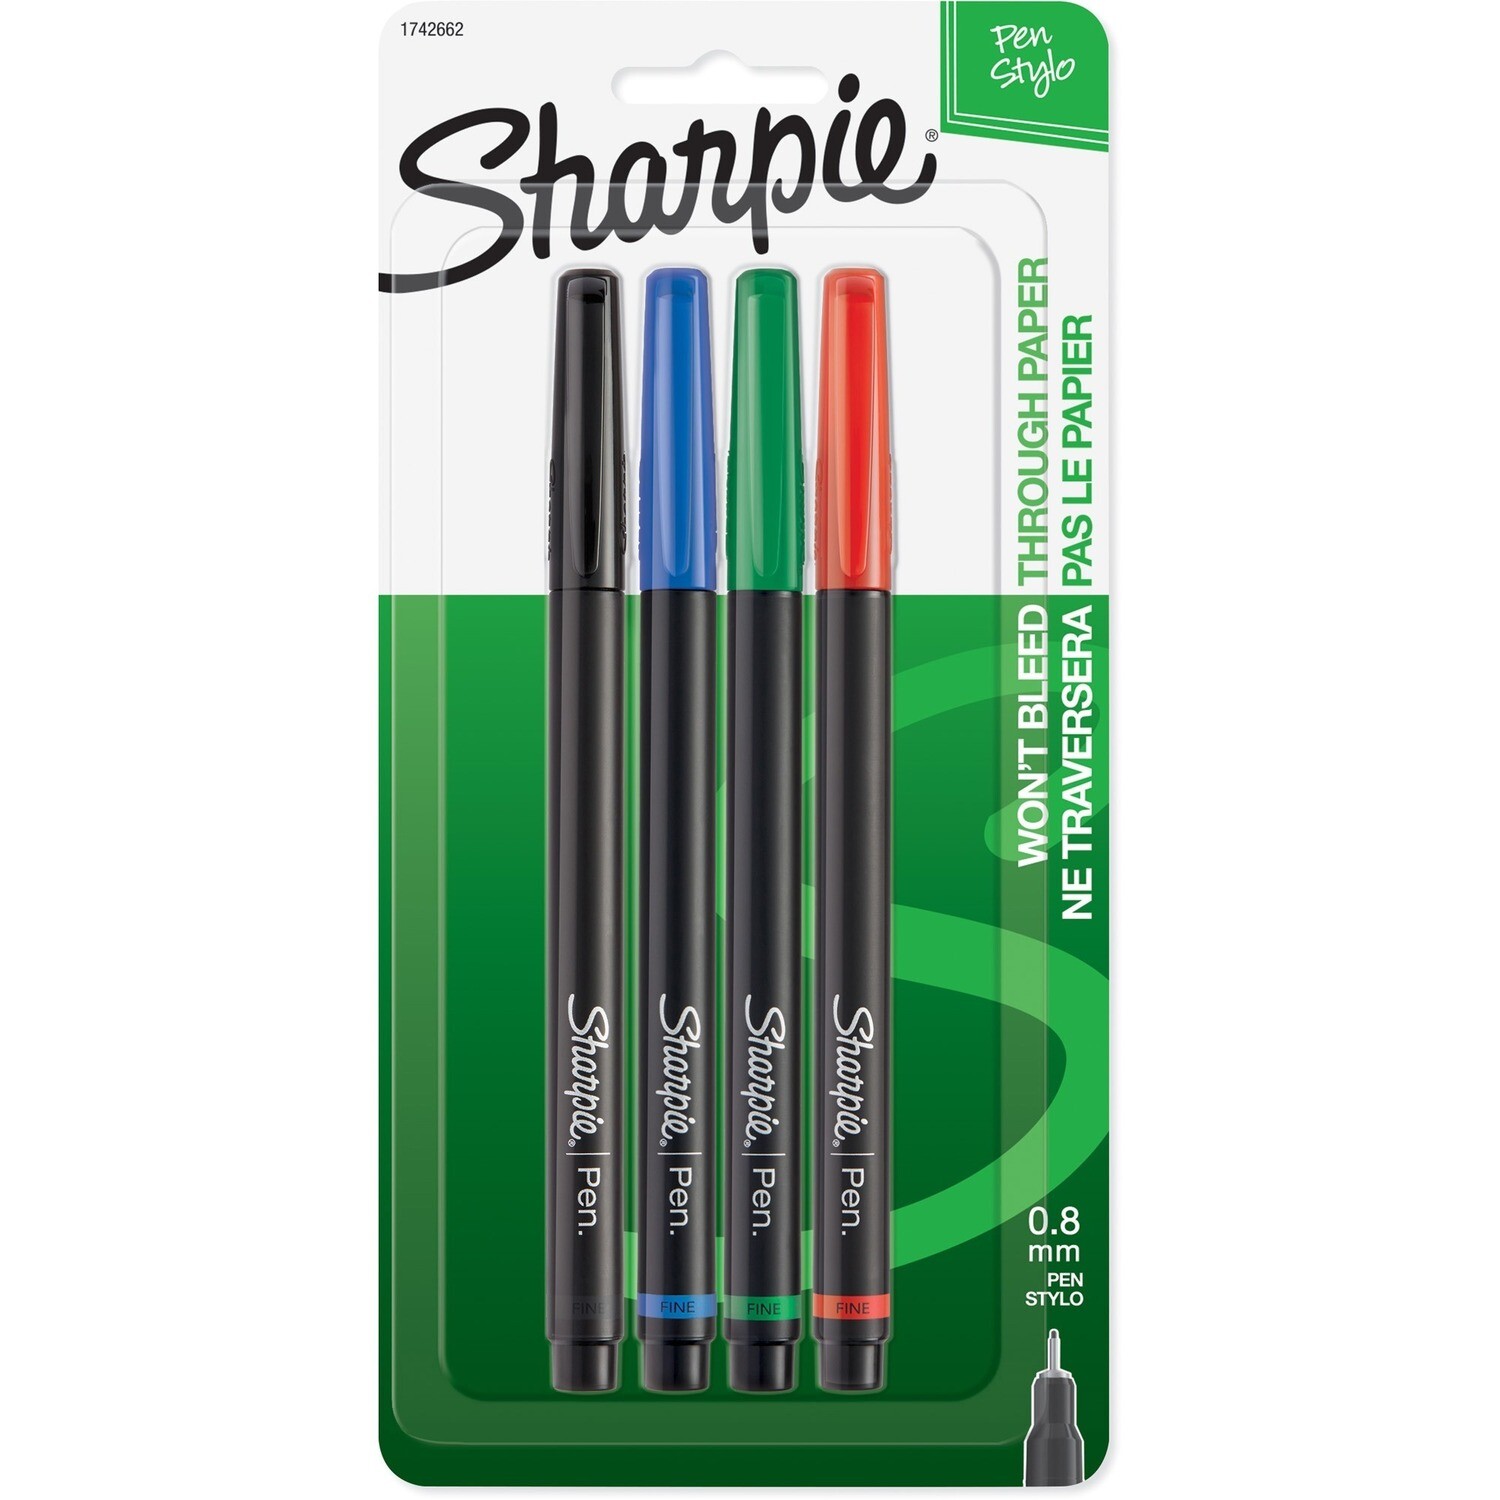 Sharpie Pen Stylo, Archival Quality Fine, 4 Pack, Assorted Colours